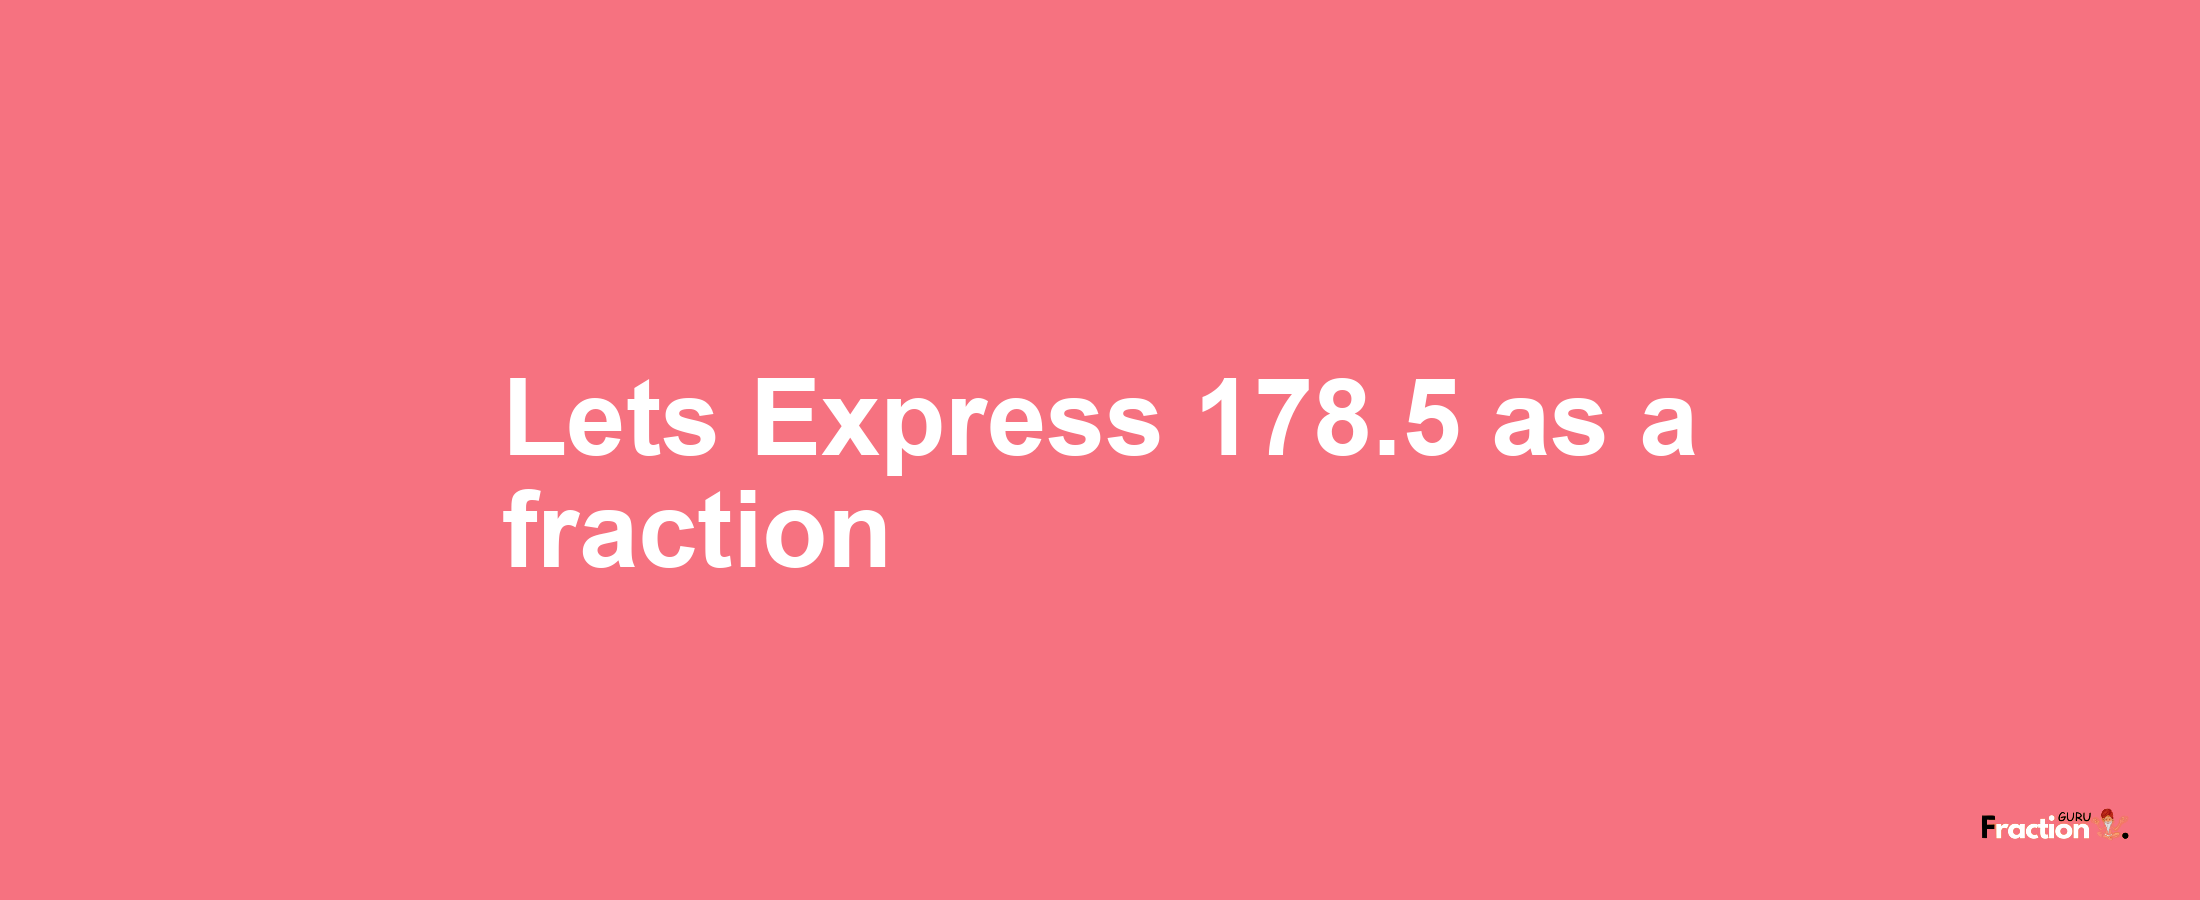 Lets Express 178.5 as afraction